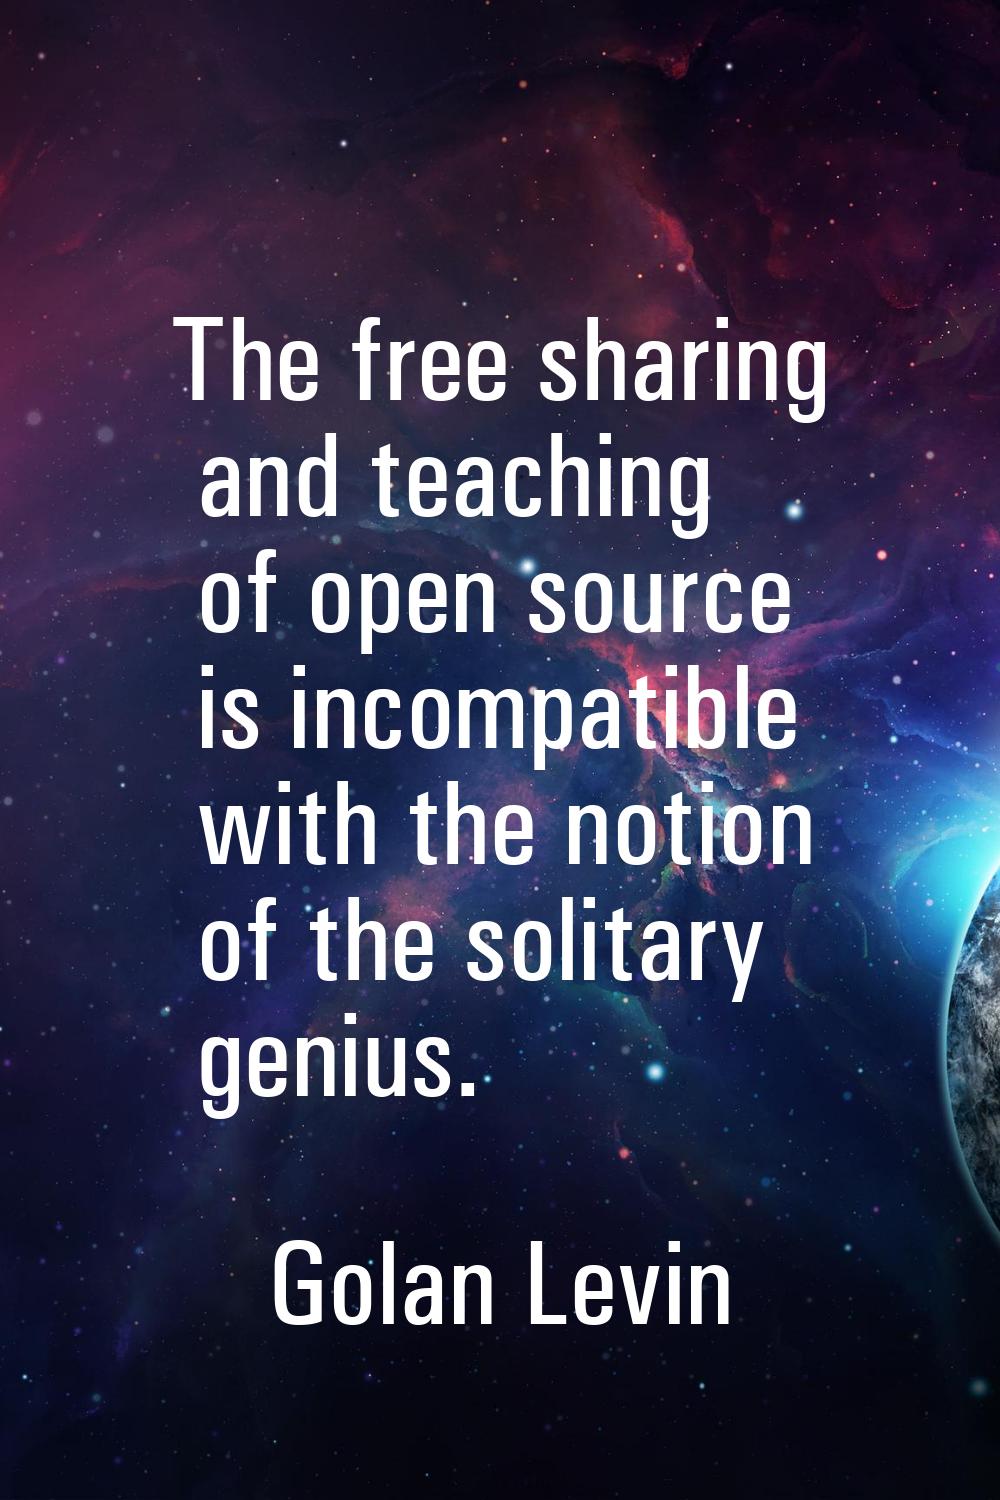 The free sharing and teaching of open source is incompatible with the notion of the solitary genius